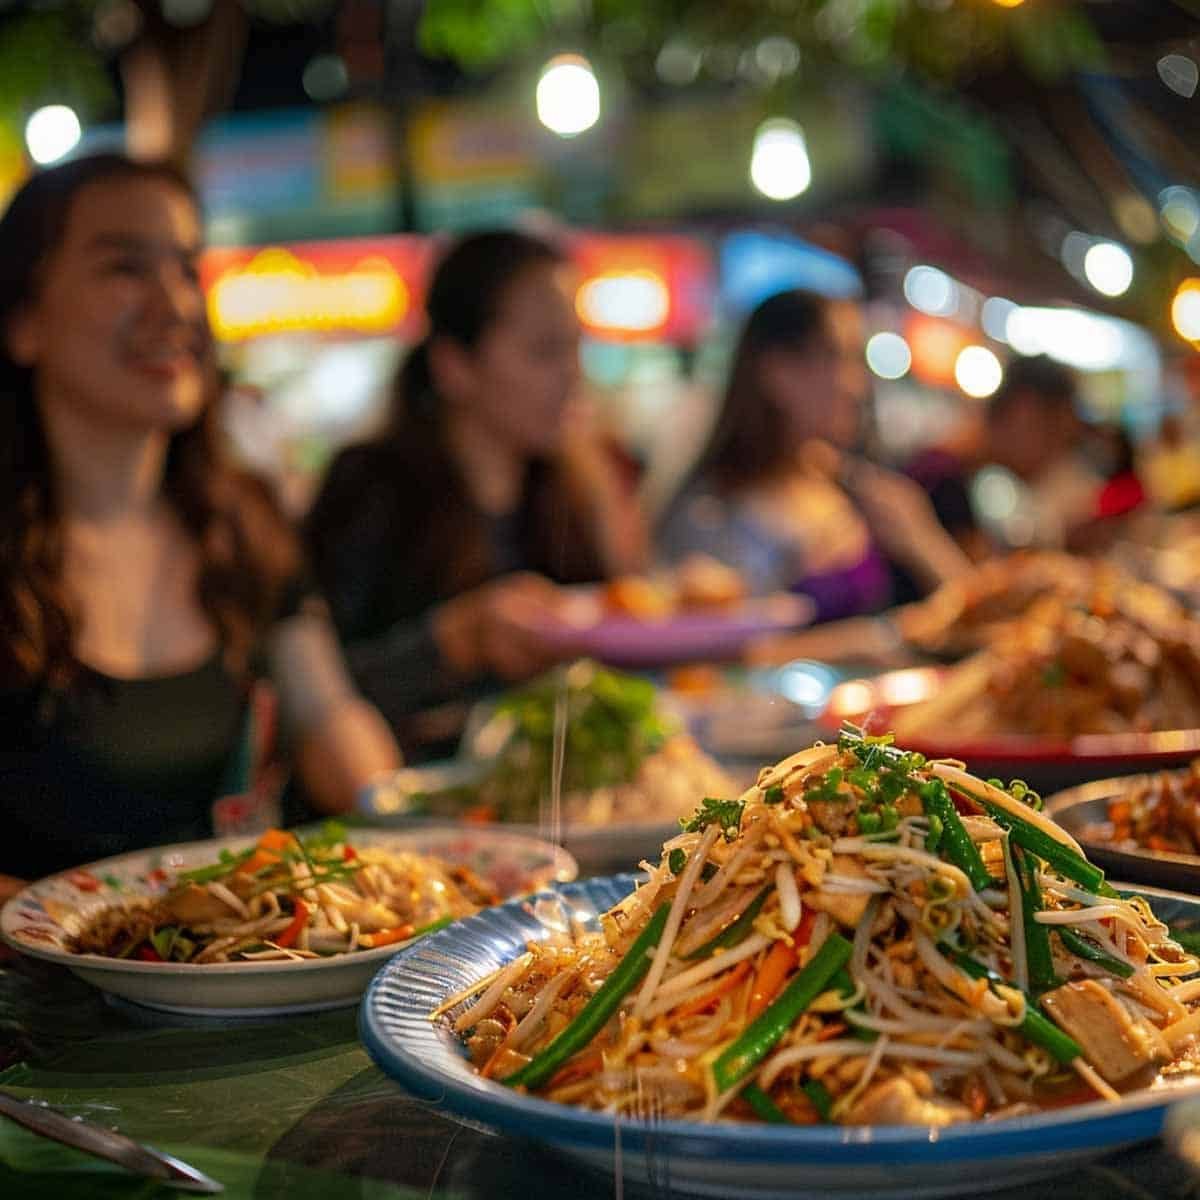 Group of friends enjoying Thai street food at a lively night market, surrounded by colorful stalls and lights.